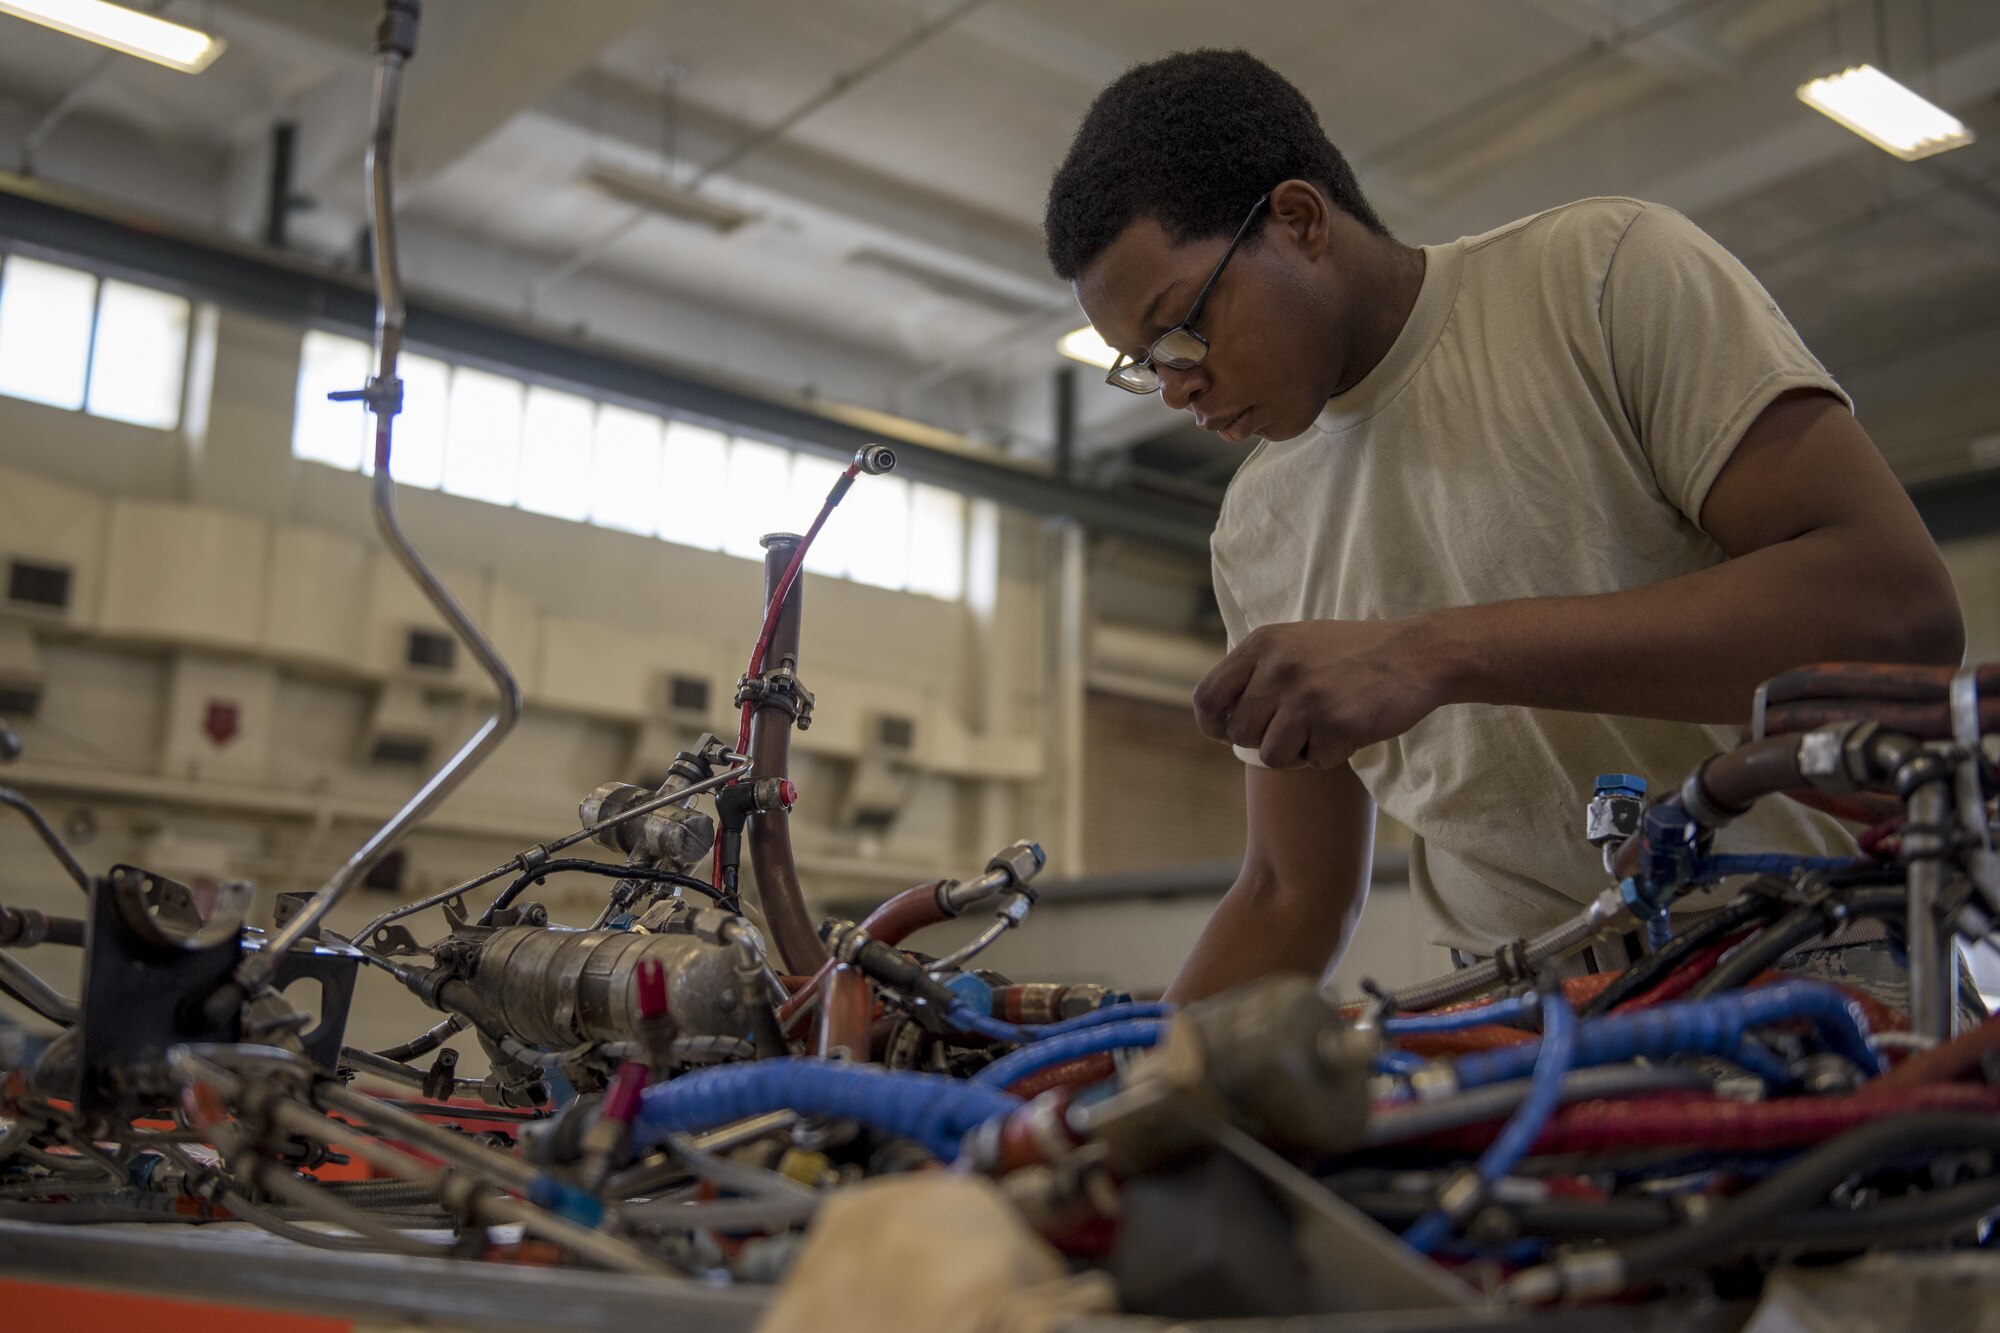 Airman 1st Class Fredrick Merritt, 18th Component Maintenance Squadron aerospace propulsion apprentice, inspects the electric harness of a TF-34 engine July 6, 2017, at Kadena Air Base, Japan. Merritt’s shop reconstructs the engines for the 25th Fighter Squadron located in Osan Air Base, Republic of Korea. (U.S. Air Force photo by Senior Airman John Linzmeier)